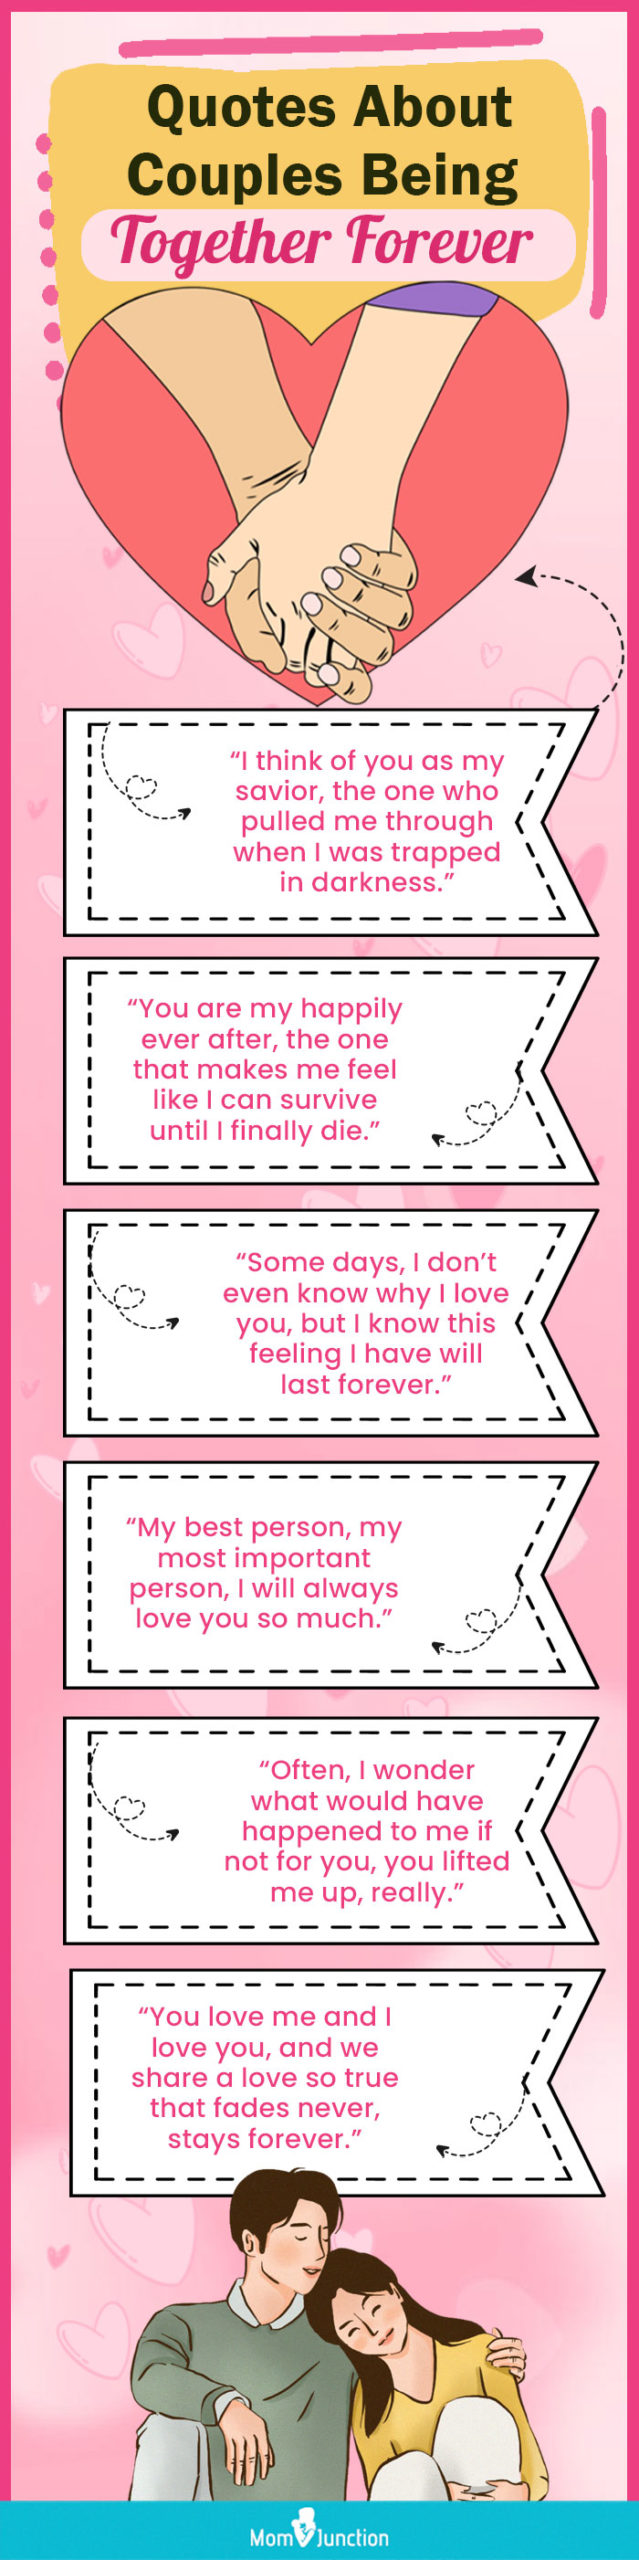 quotes about couples being together forever (infographic)